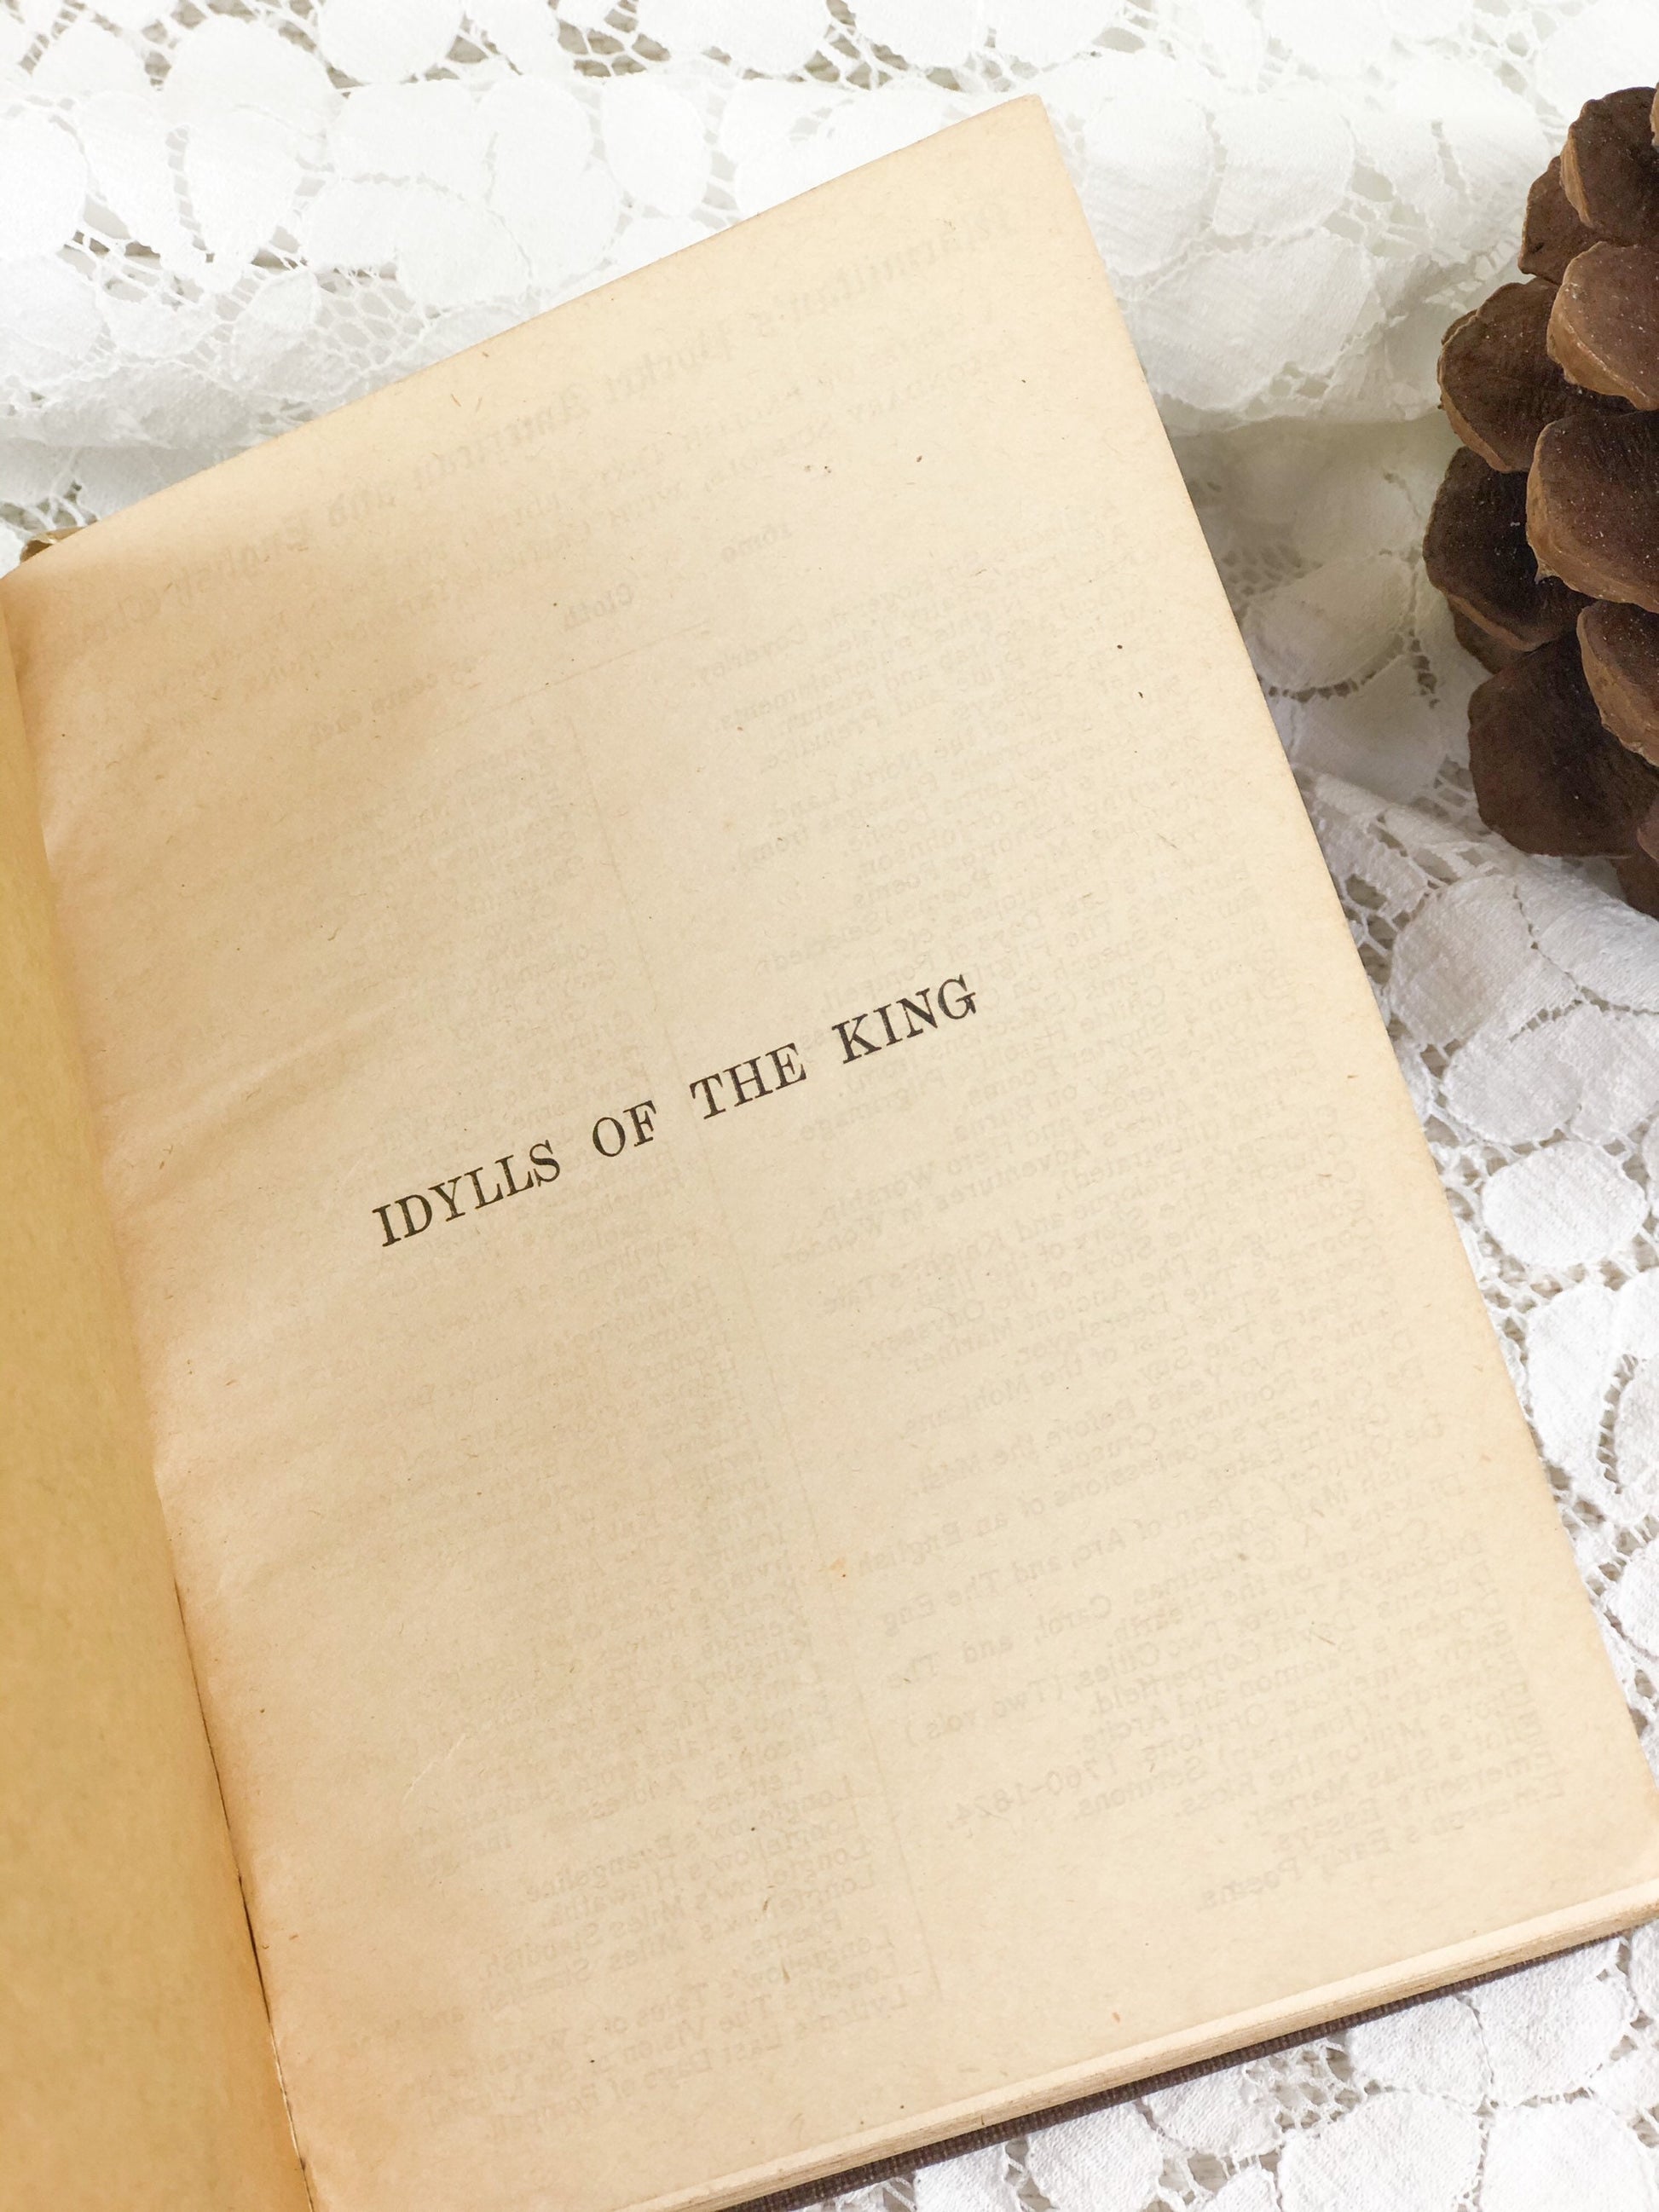 Tennyson's Idylls of the King, Vintage Book